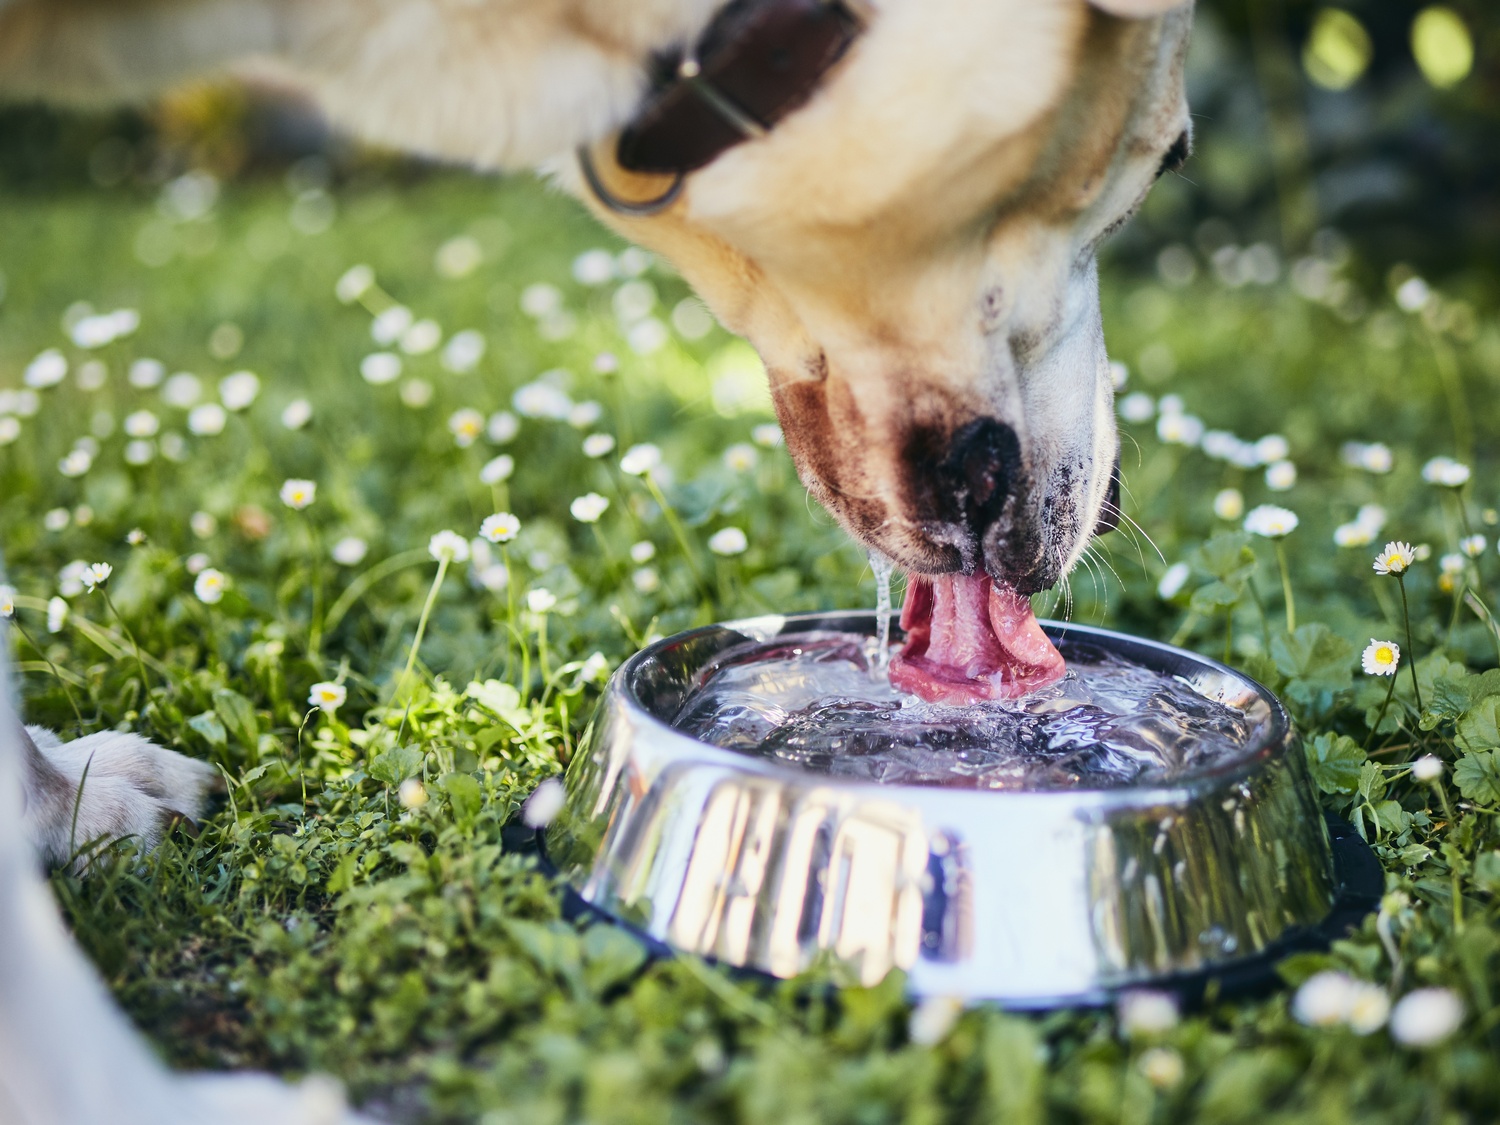 how can you tell if a dog is dehydrated and throwing up